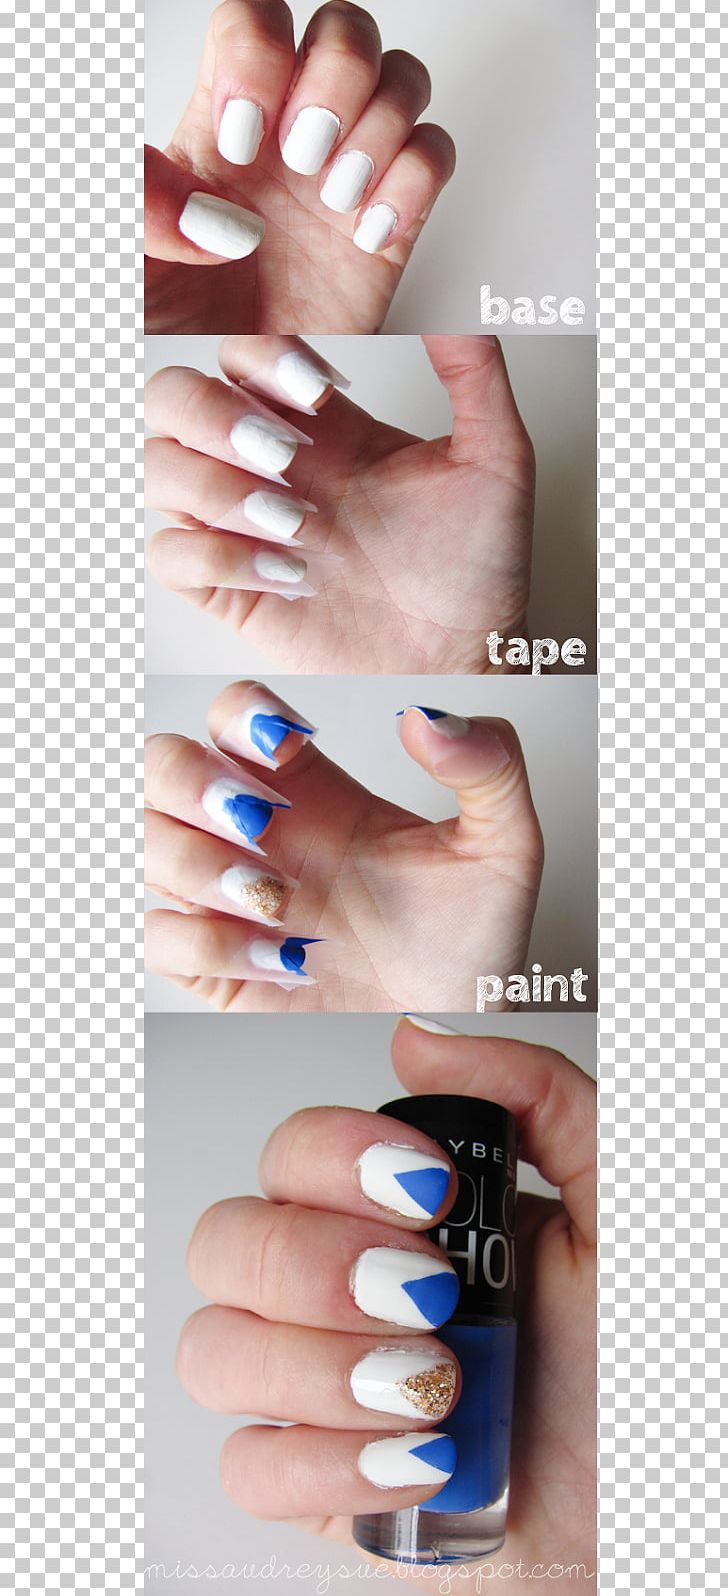 Nail Polish Manicure Hand Model Product Design PNG, Clipart, Cosmetics, Finger, Hand, Hand Model, Lip Free PNG Download